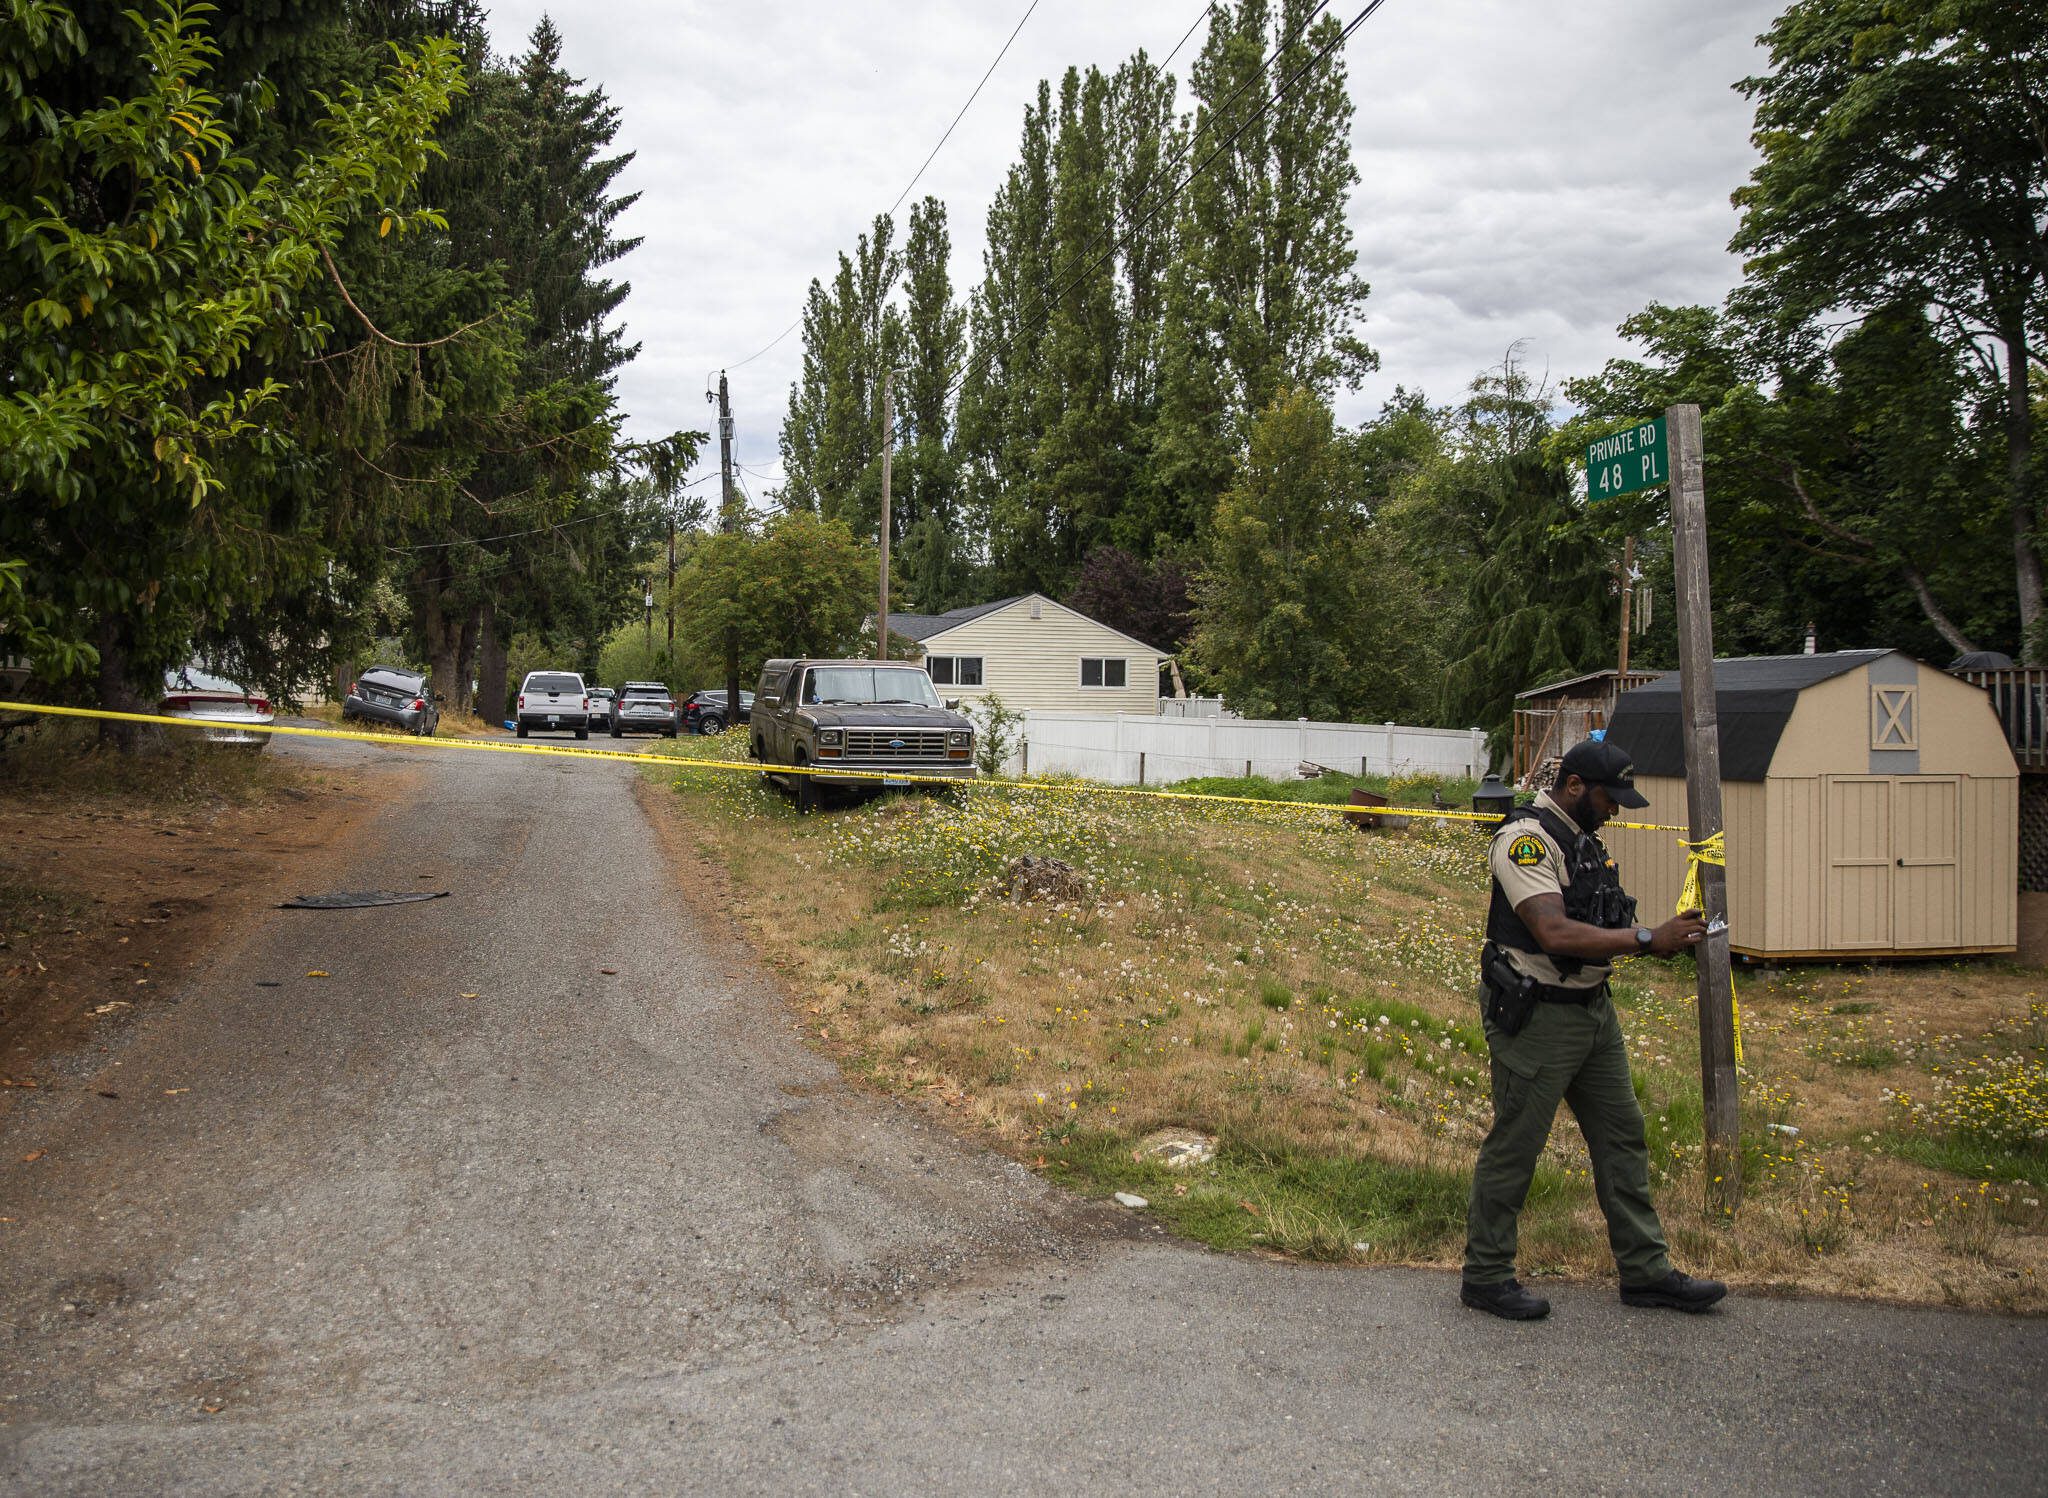 A Snohomish County Sheriff’s deputy works at the scene of a shooting that left one person dead on Thursday, Aug. 10, 2023, in Lynnwood, Washington. (Olivia Vanni / The Herald)